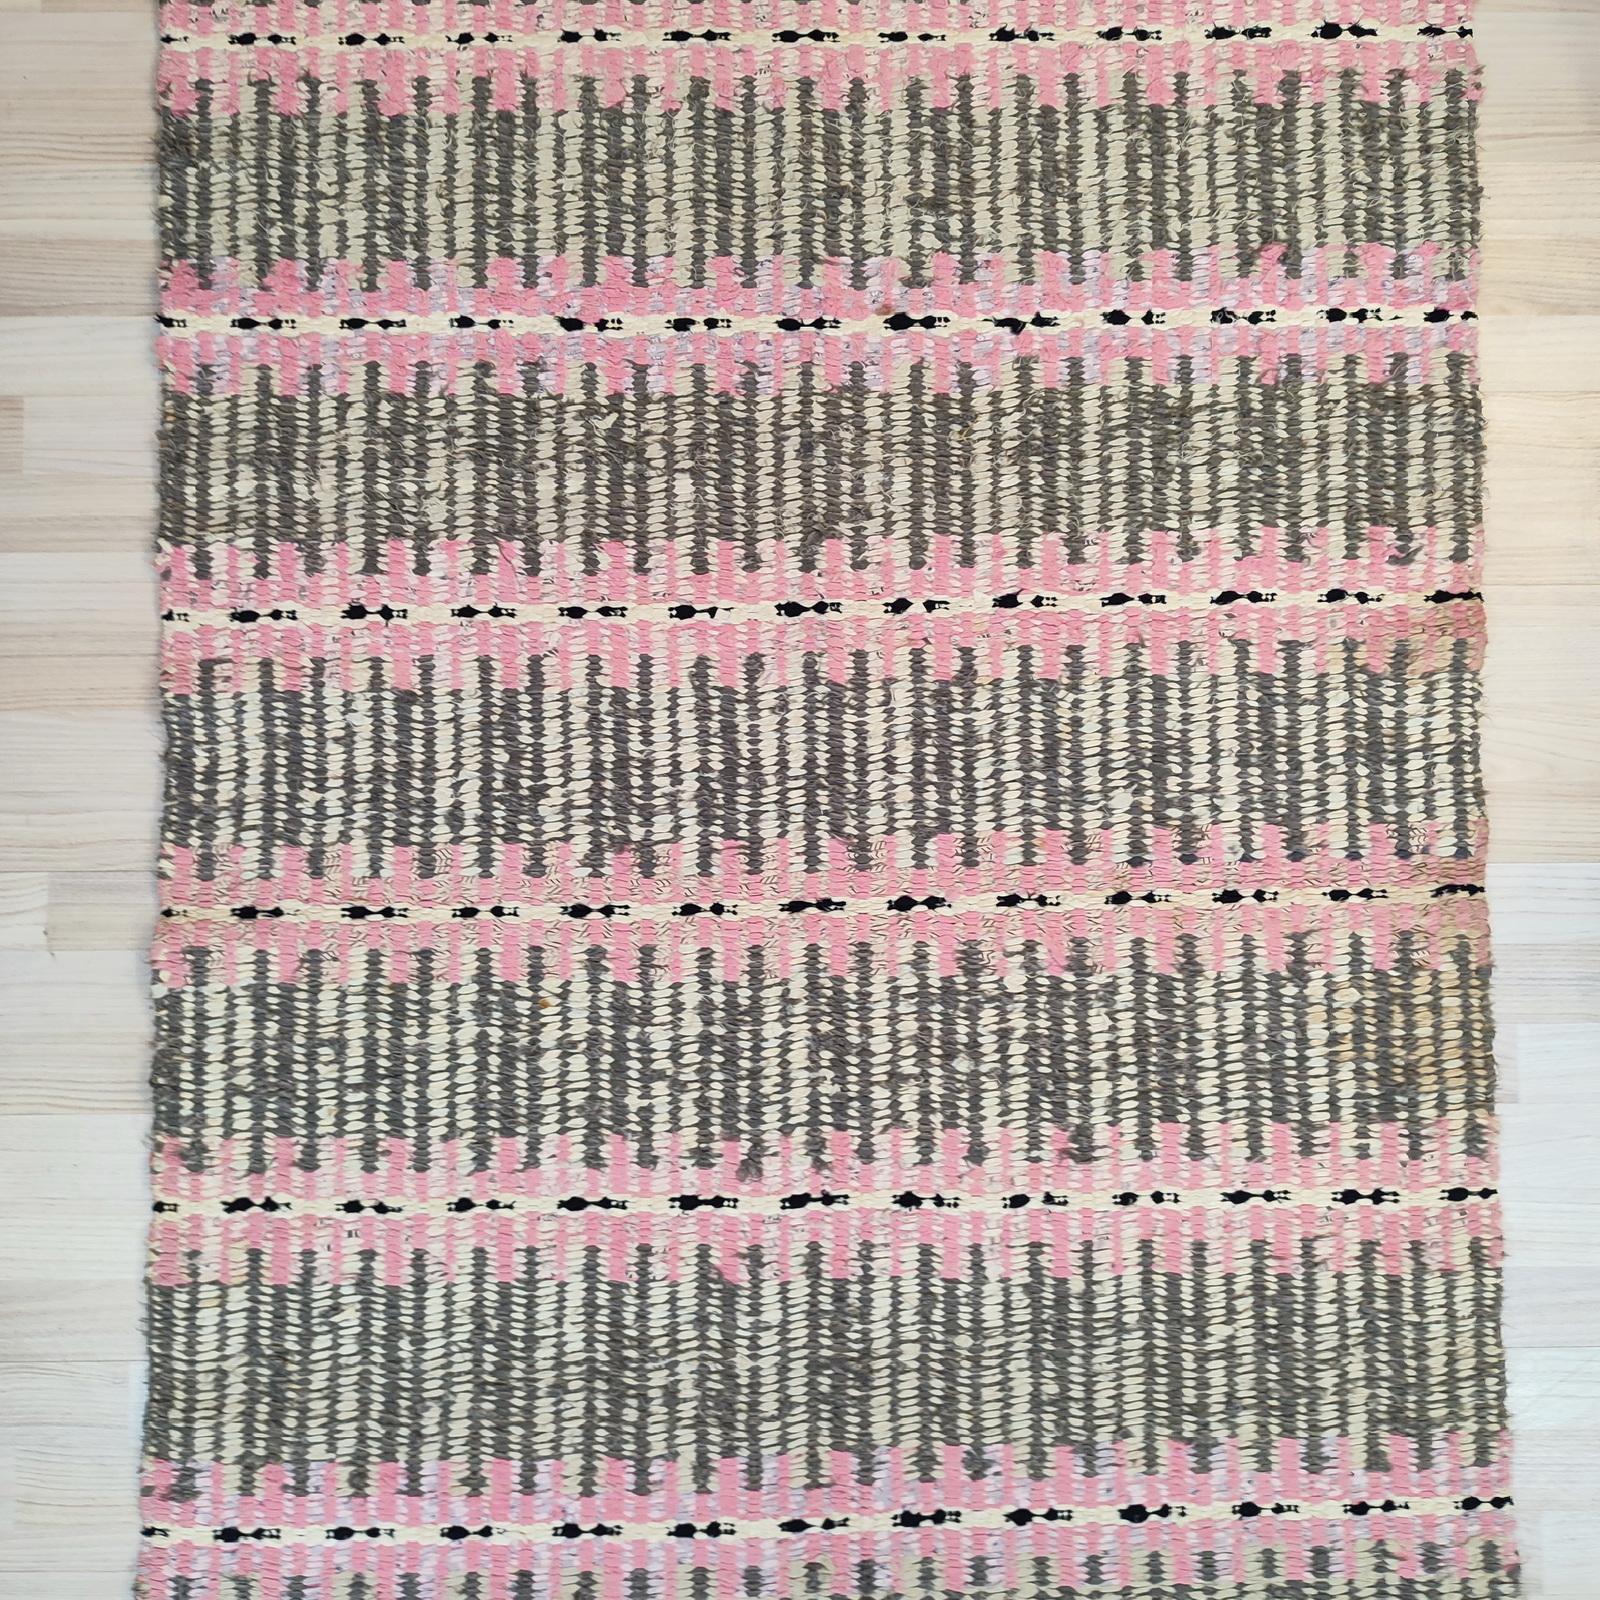 Mid 20th Century Handwoven Cotton Rag Rug In Excellent Condition For Sale In Bochum, NRW